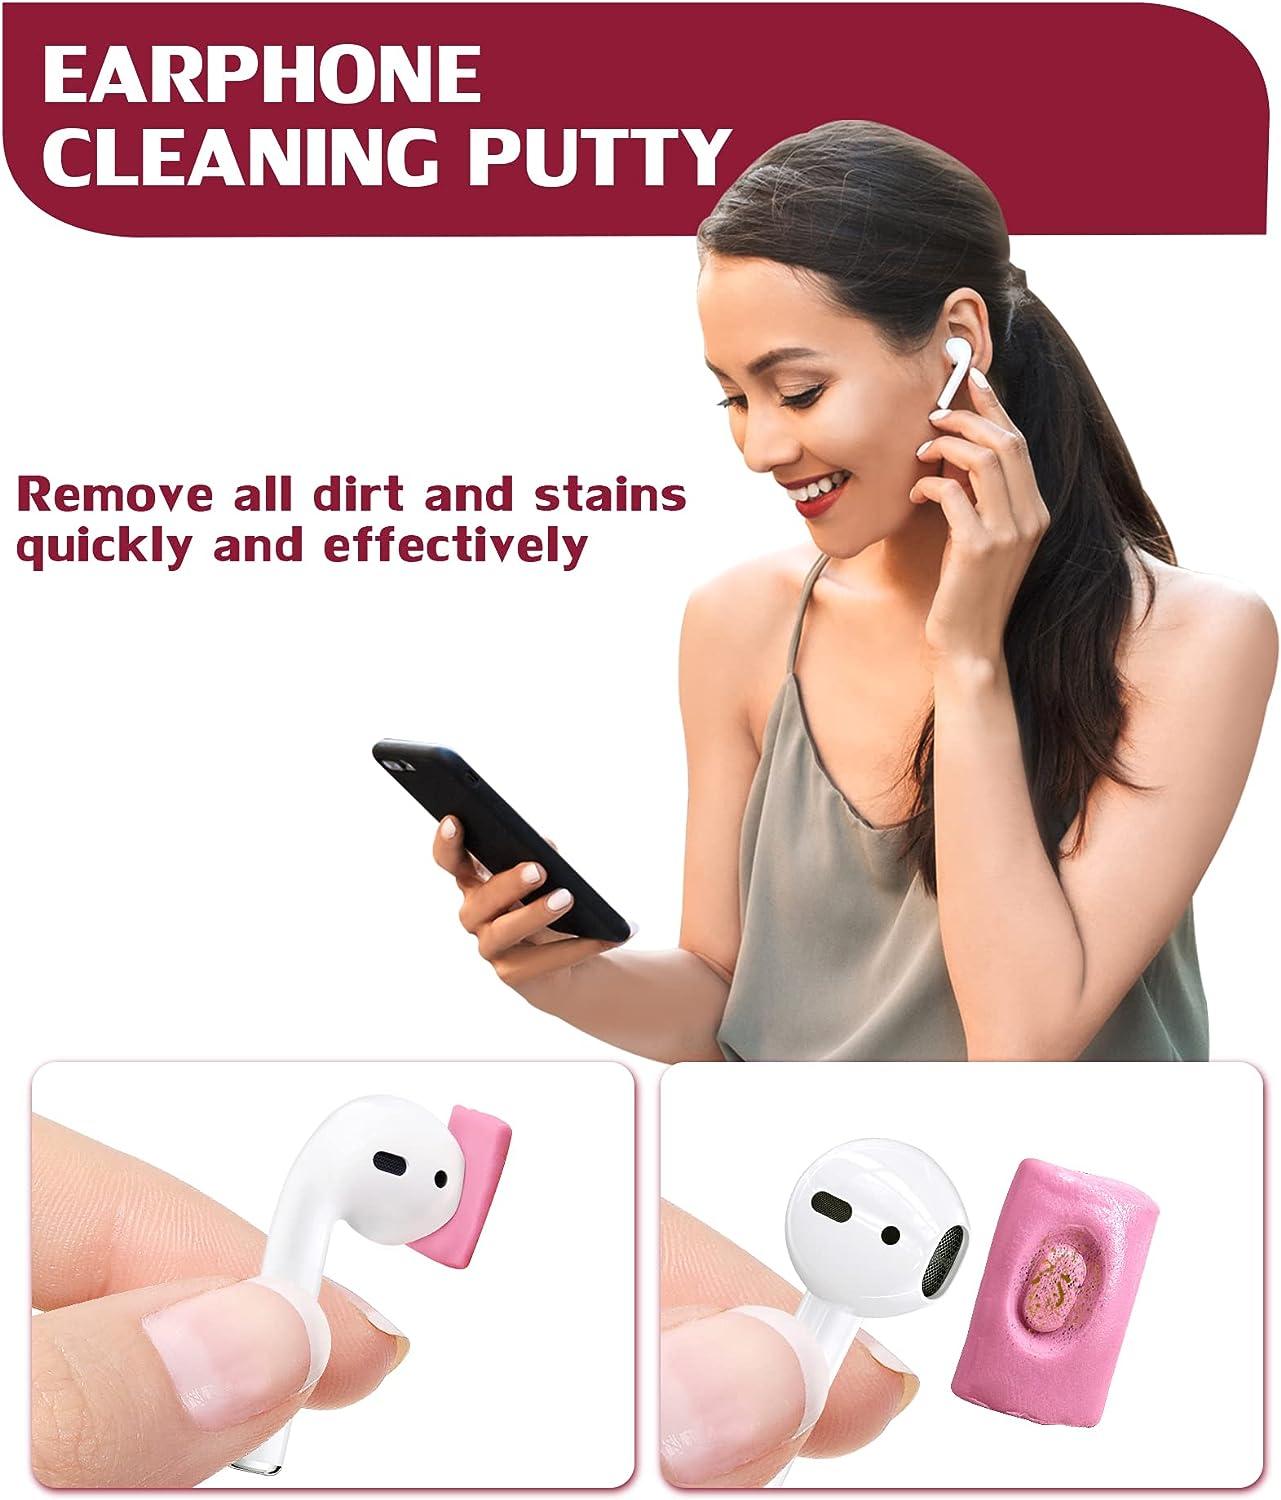 Aocii Cleaner kit for Airpod, Cleaning Putty Compatible with Airpod 3  Airpods pro, Phone Charging Port Cleaning Tool, Pink Cleaner kit for  iPhone/Speaker/Earbud, Electronics Cleaner, Gift for Women